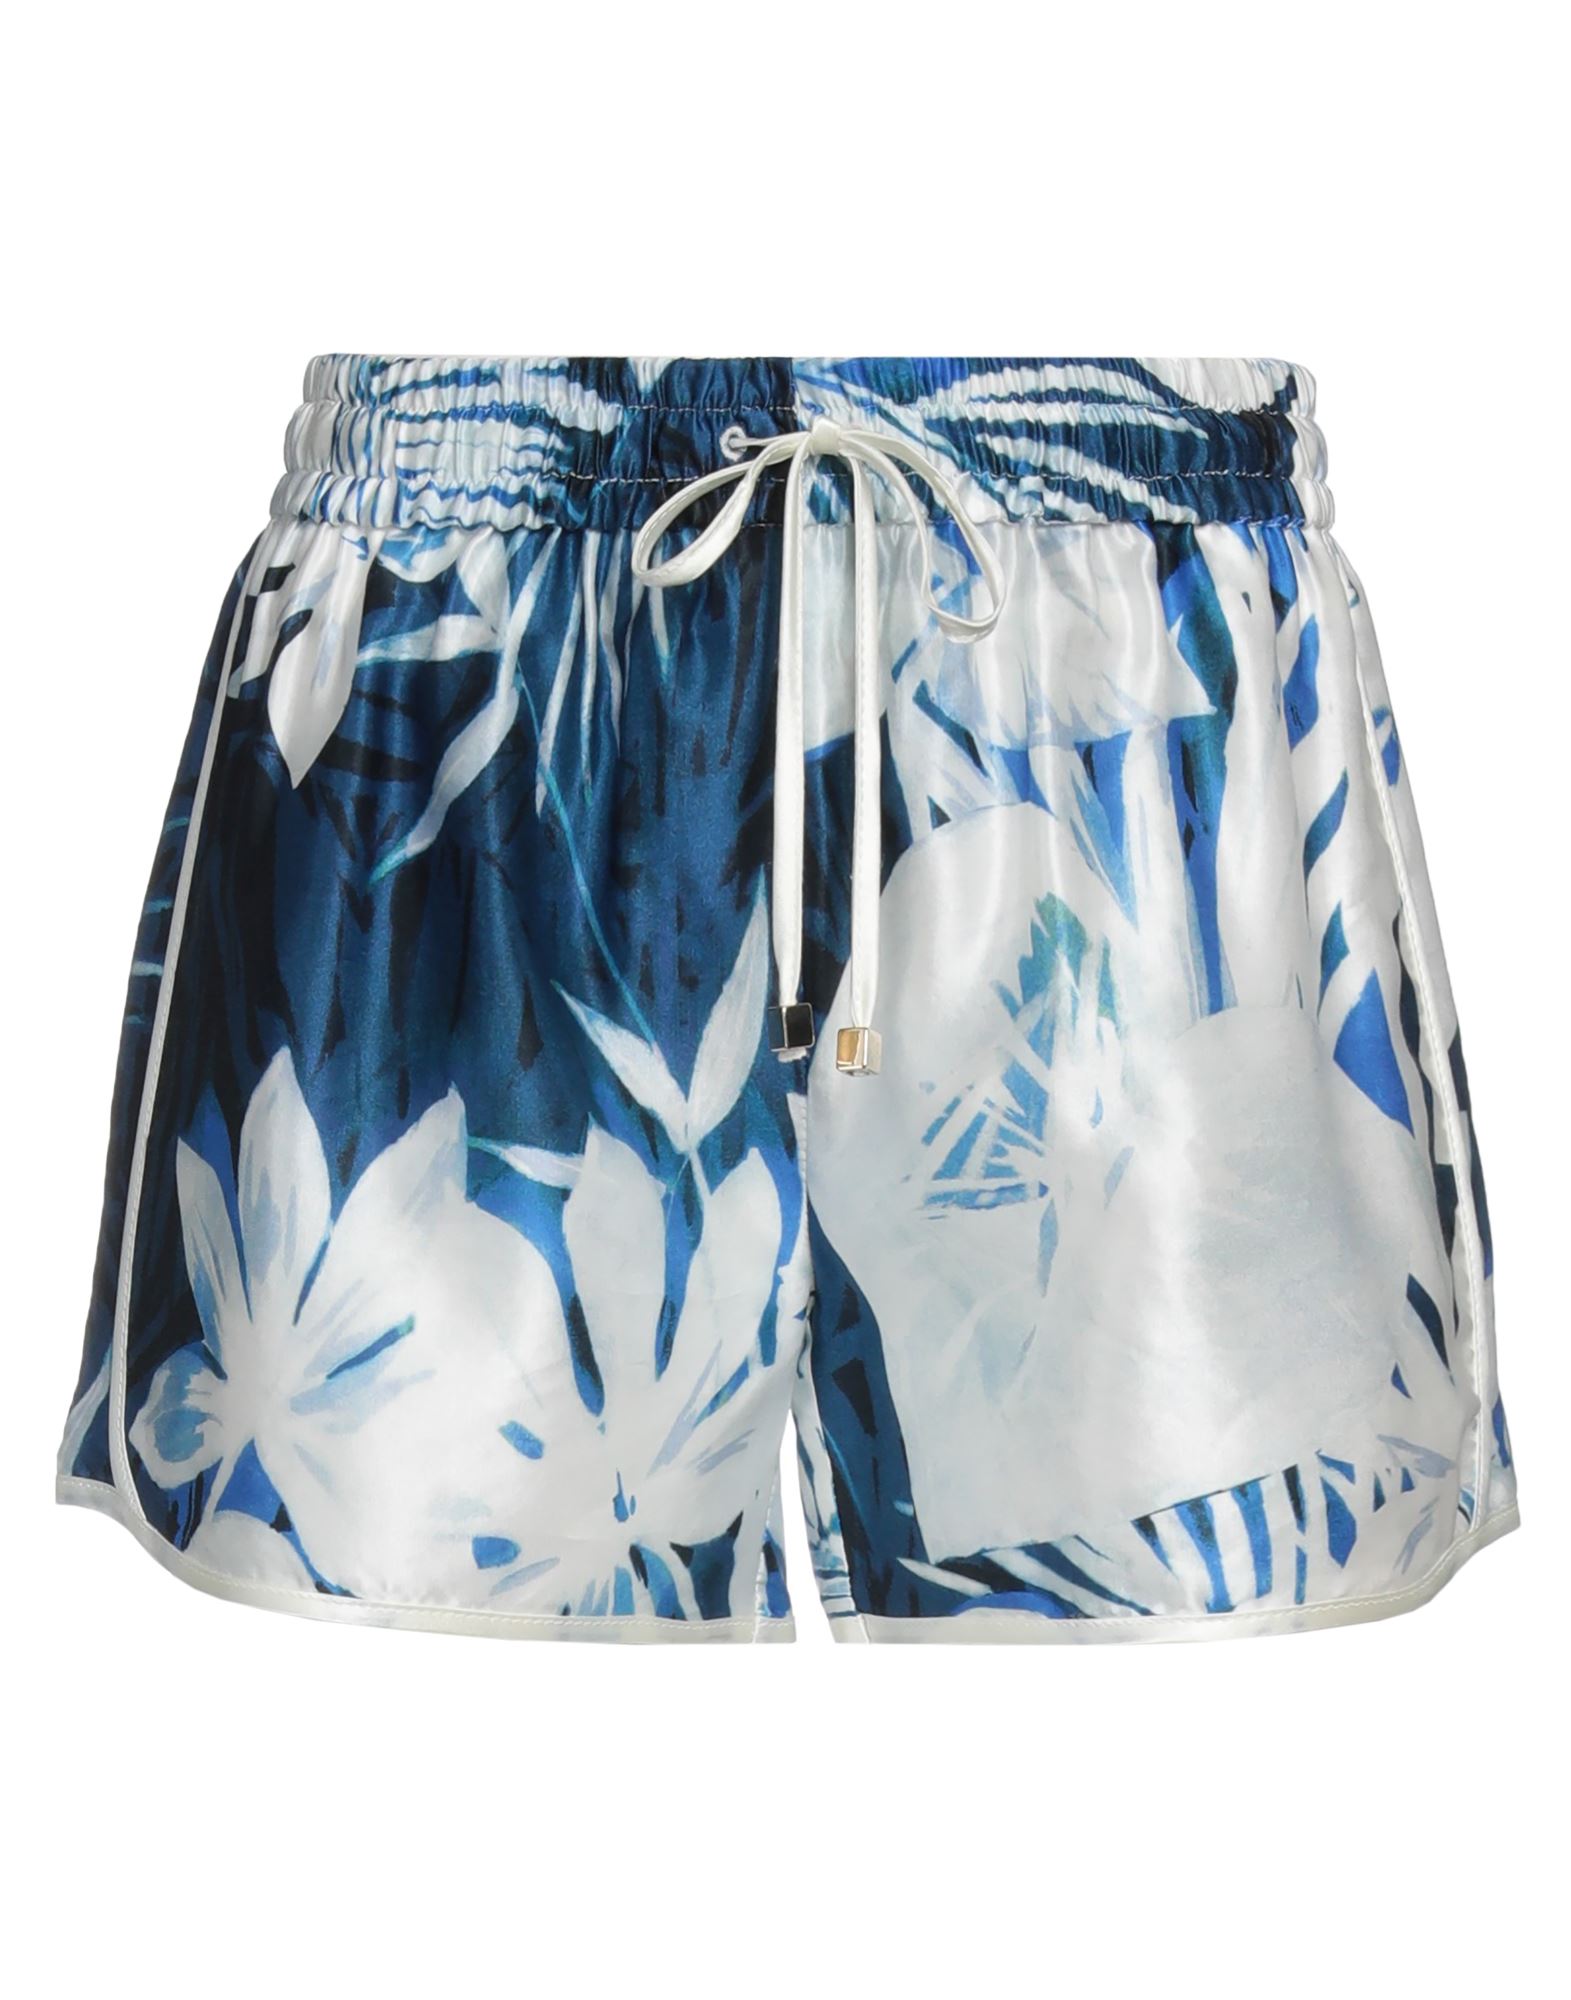 F.R.S. FOR RESTLESS SLEEPERS Shorts & Bermudashorts Damen Azurblau von F.R.S. FOR RESTLESS SLEEPERS